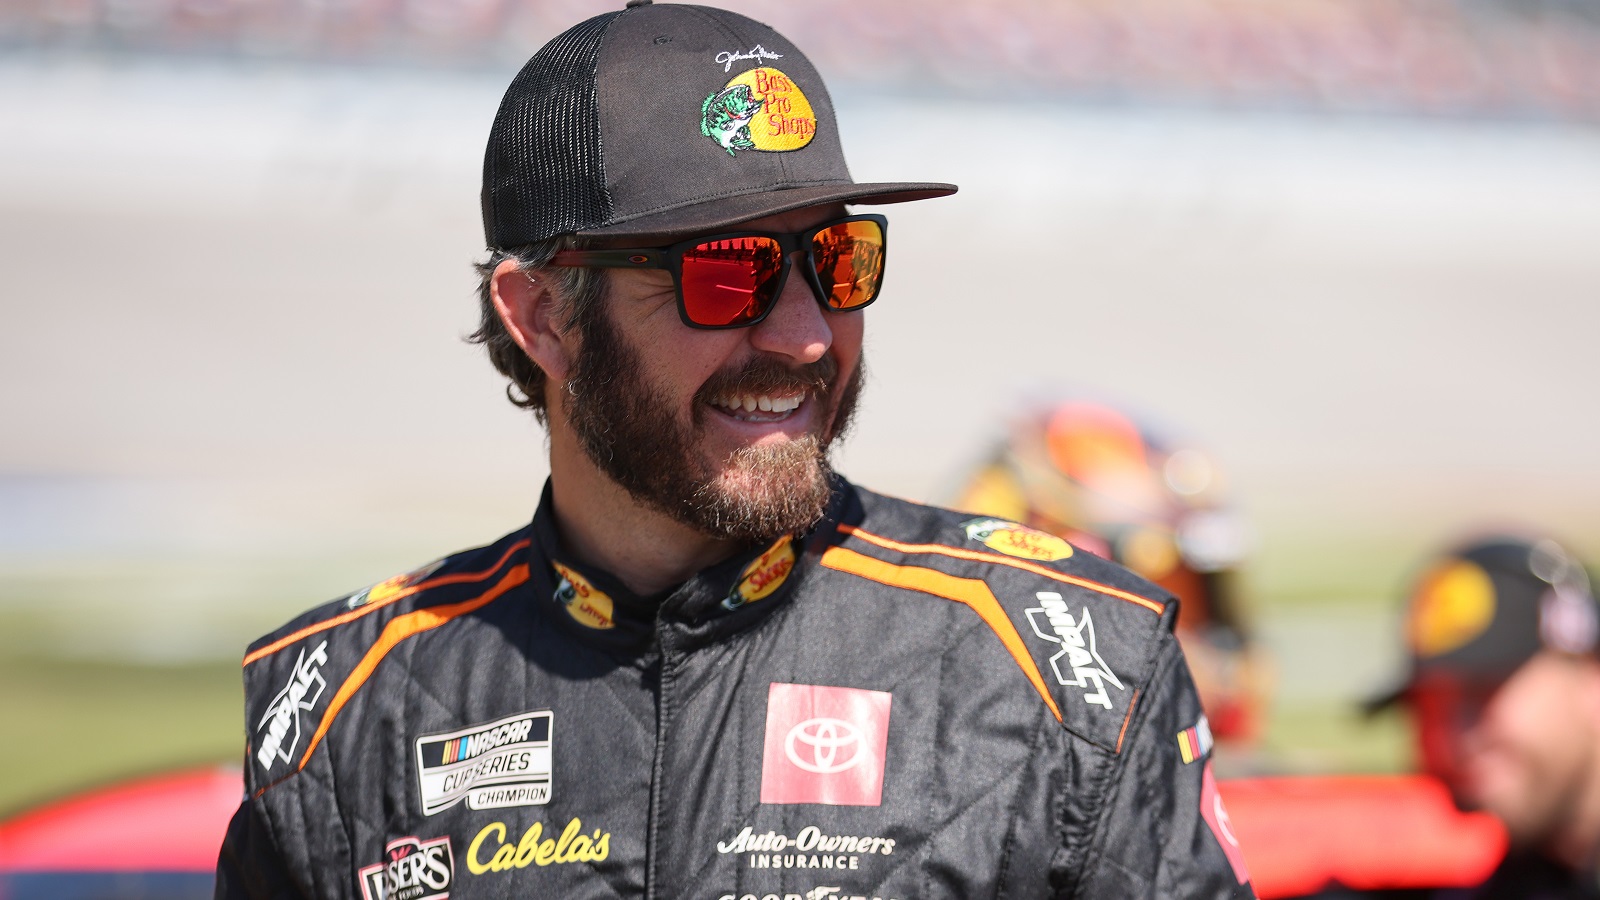 Martin Truex Jr. walks the grid during qualifying for the NASCAR Cup Series GEICO 500 at Talladega Superspeedway on April 23, 2022.